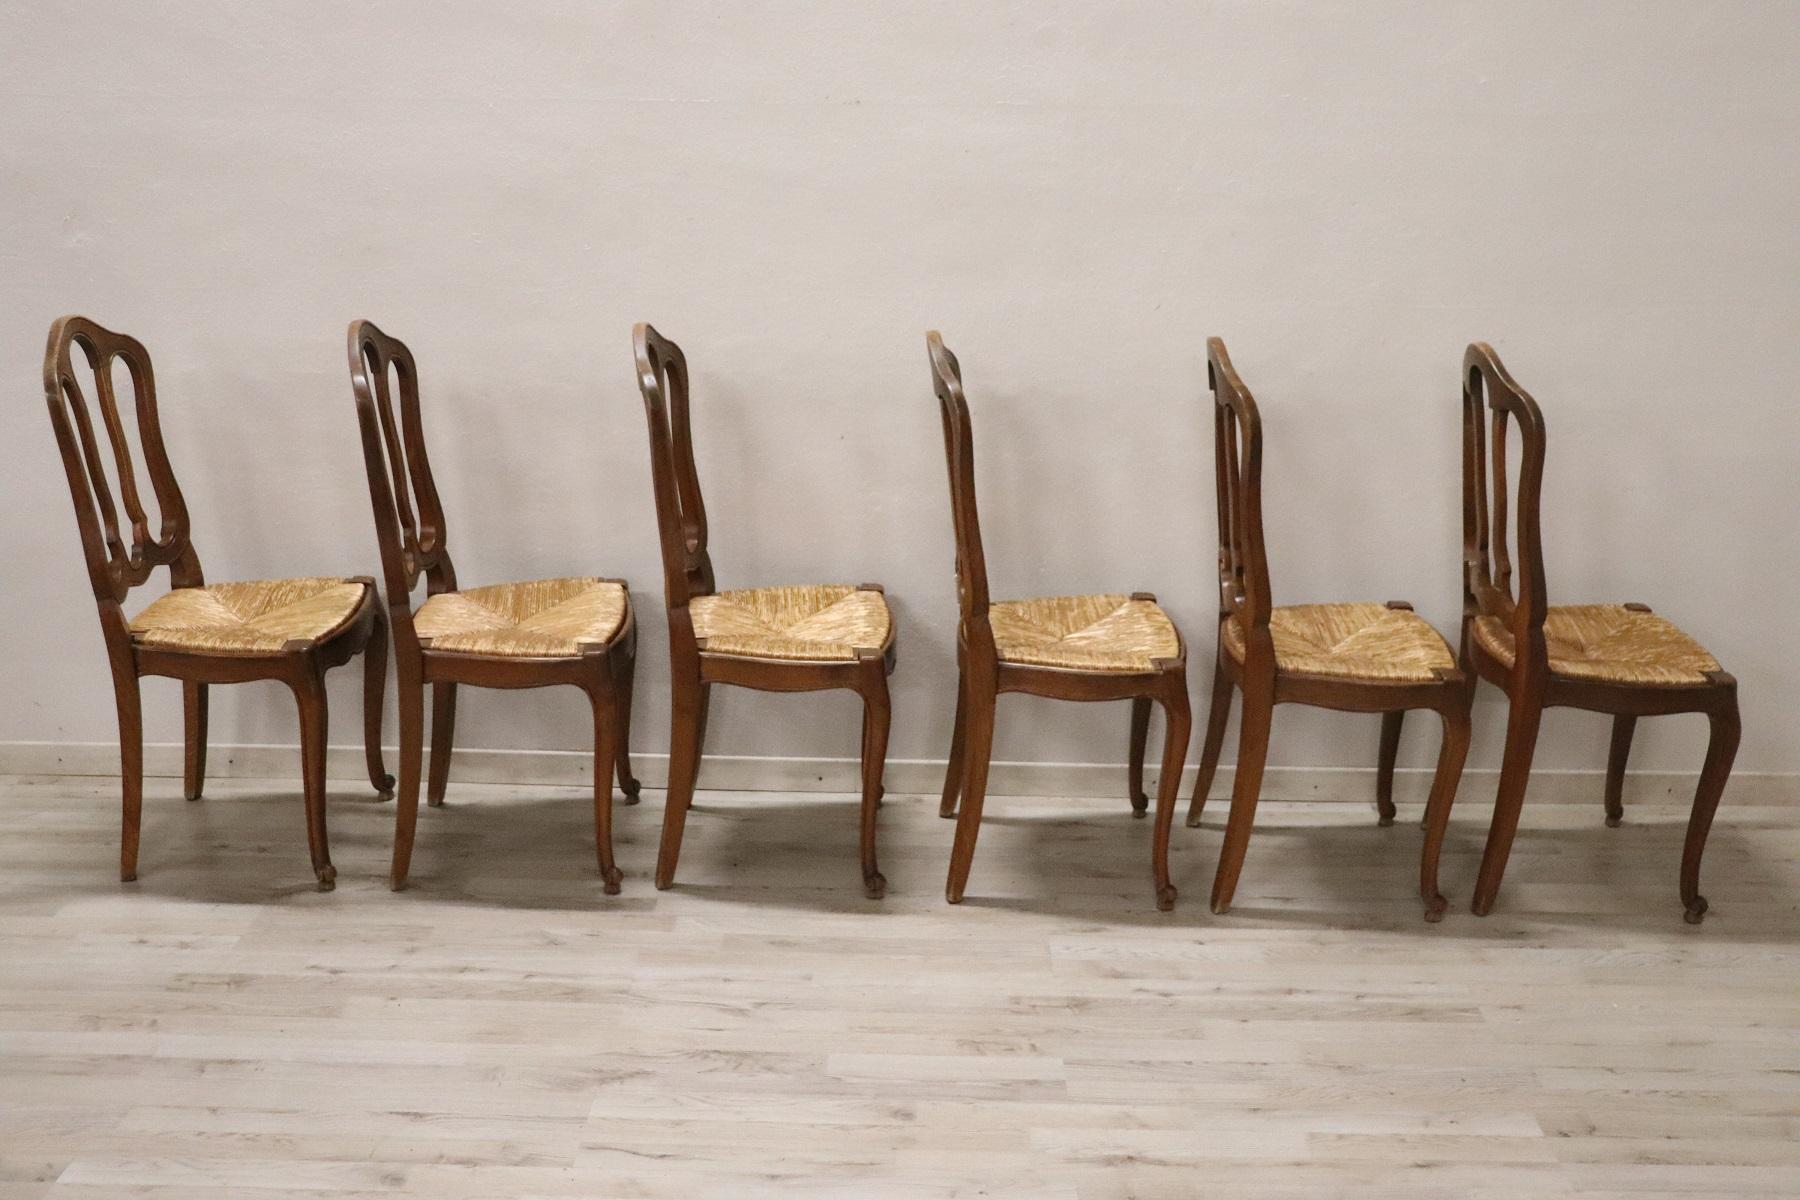 20th Century French Solid Chestnut Wood Set of Six Chairs with Straw Seat 2